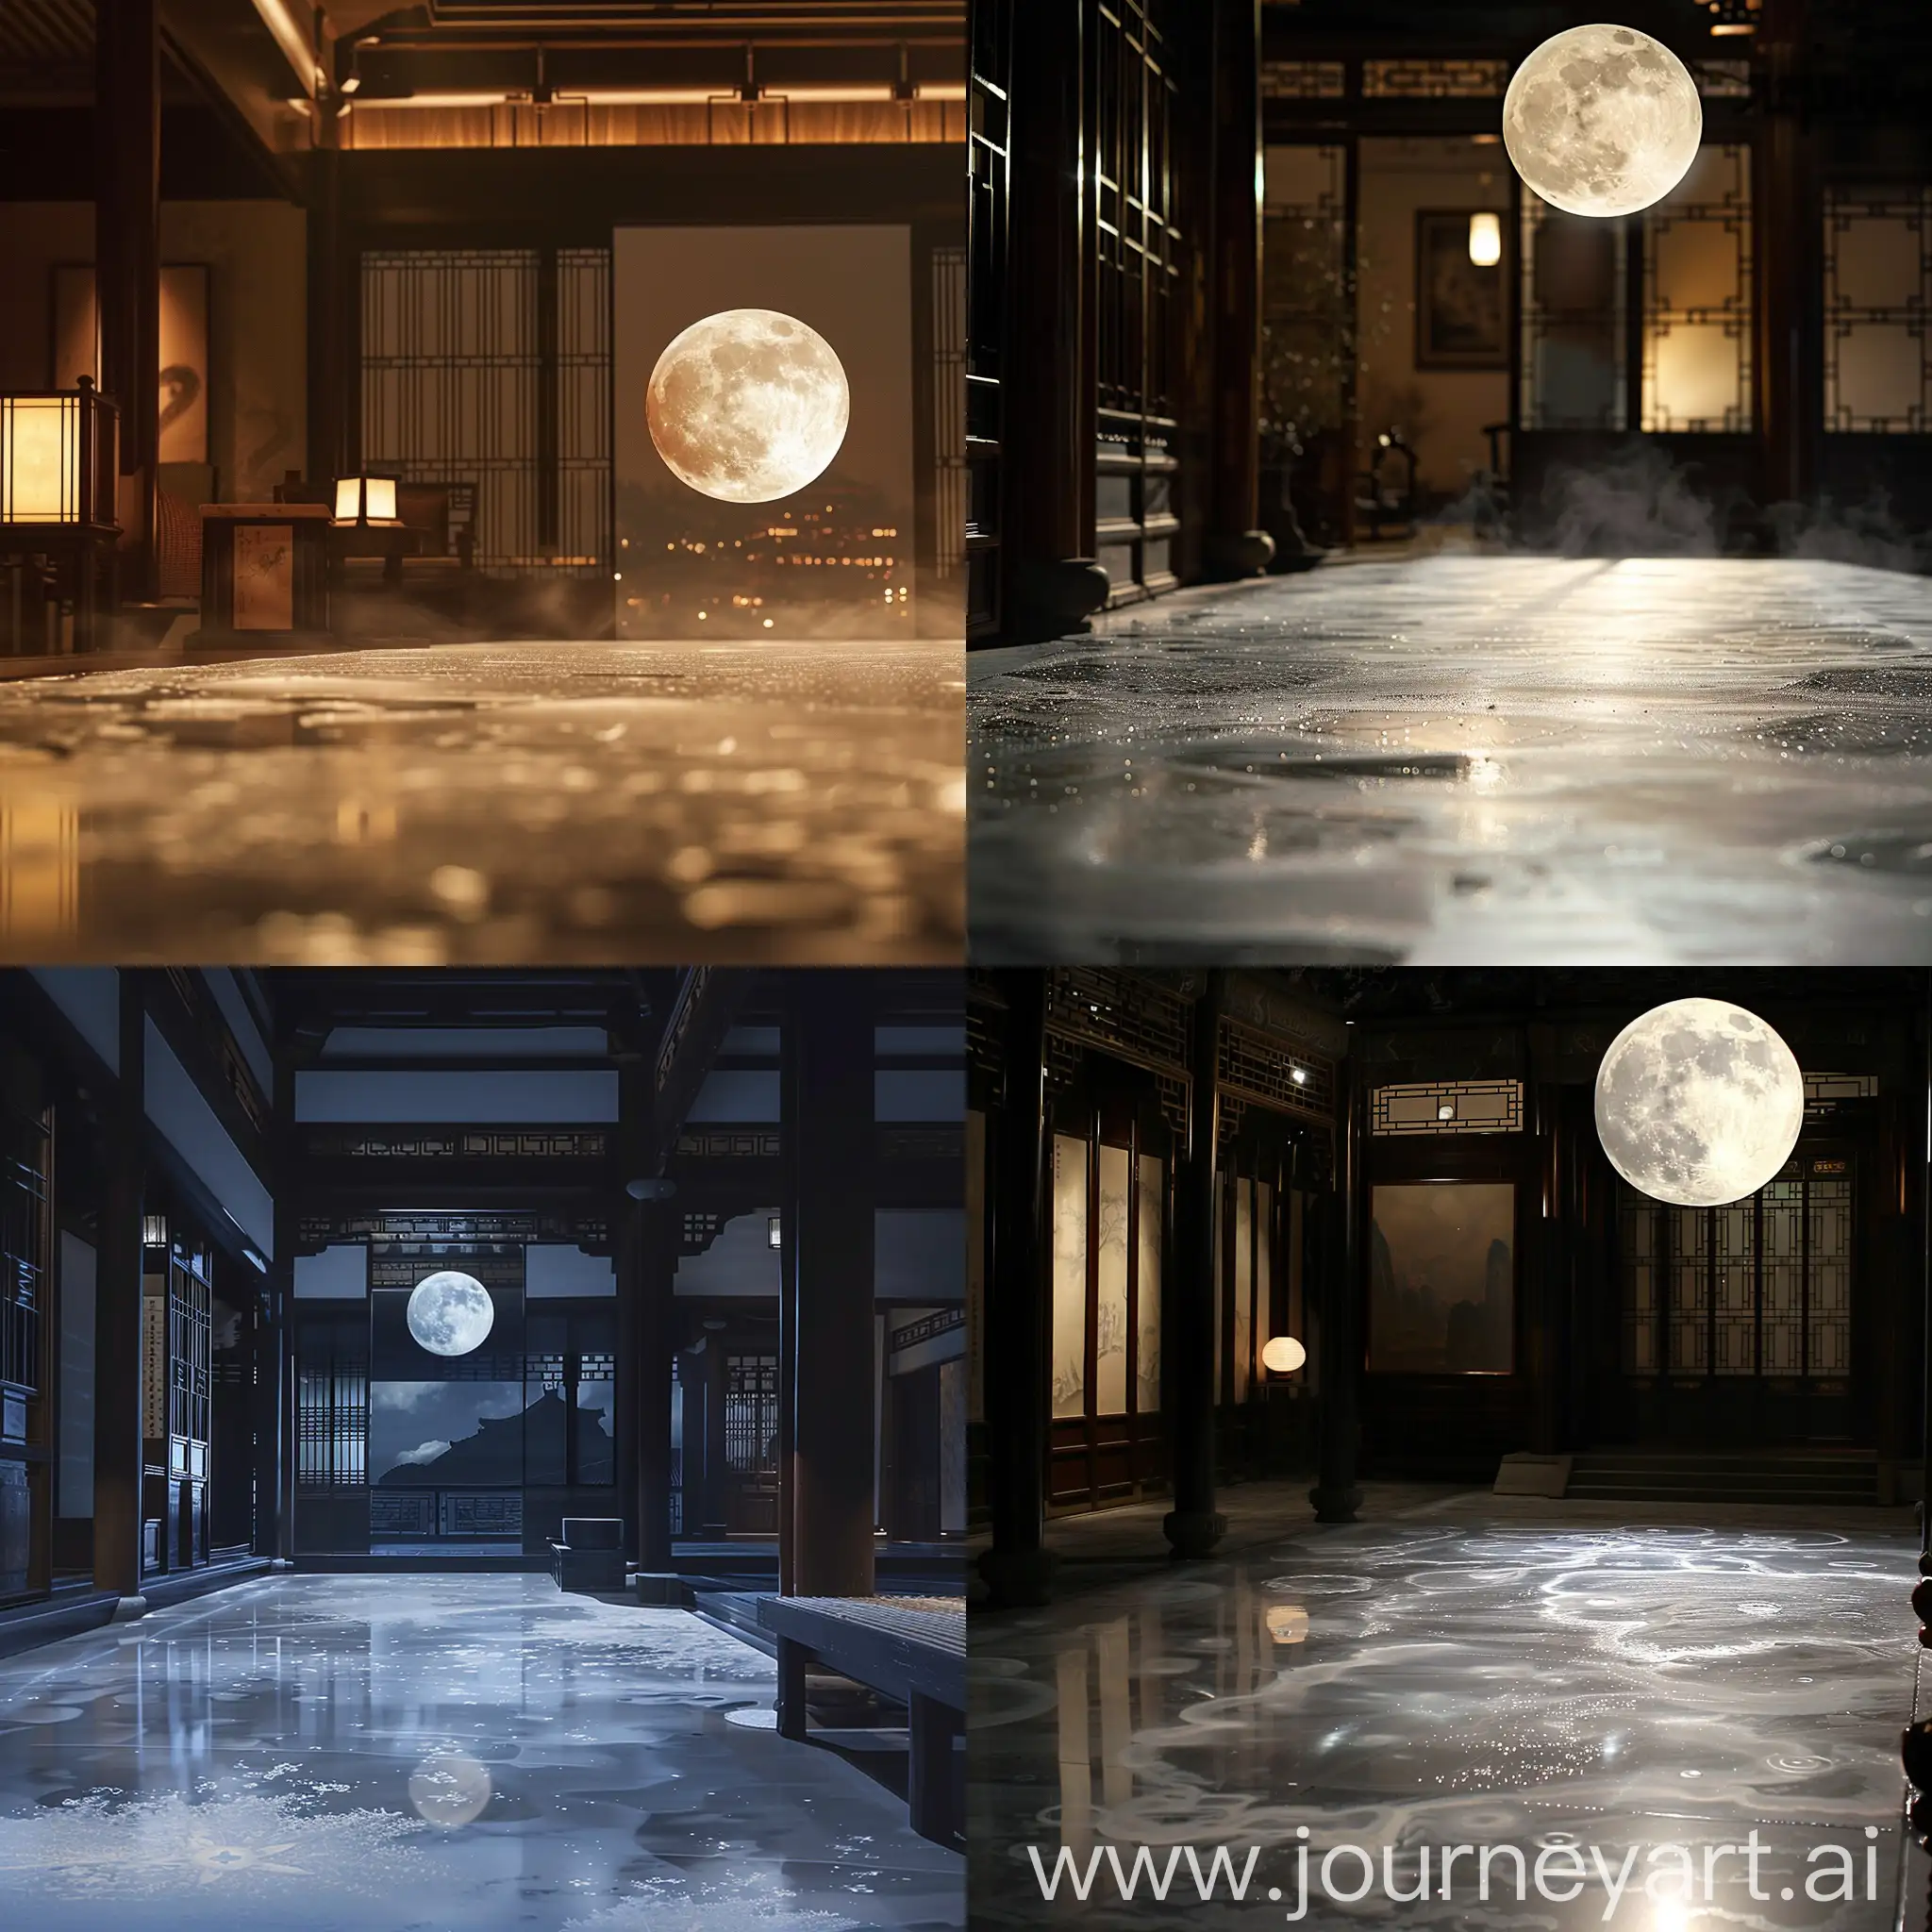 The moon casts a clear, cool glow across the room, creating a frost-like effect on the floor. The dim ambient lighting contrasts with the sharp moonlight, enhancing the poet Li Bai’s feeling of solitude in a traditional Chinese setting of ink-wash painting style. Emphasize the sharpness and purity of the light to symbolize longing.